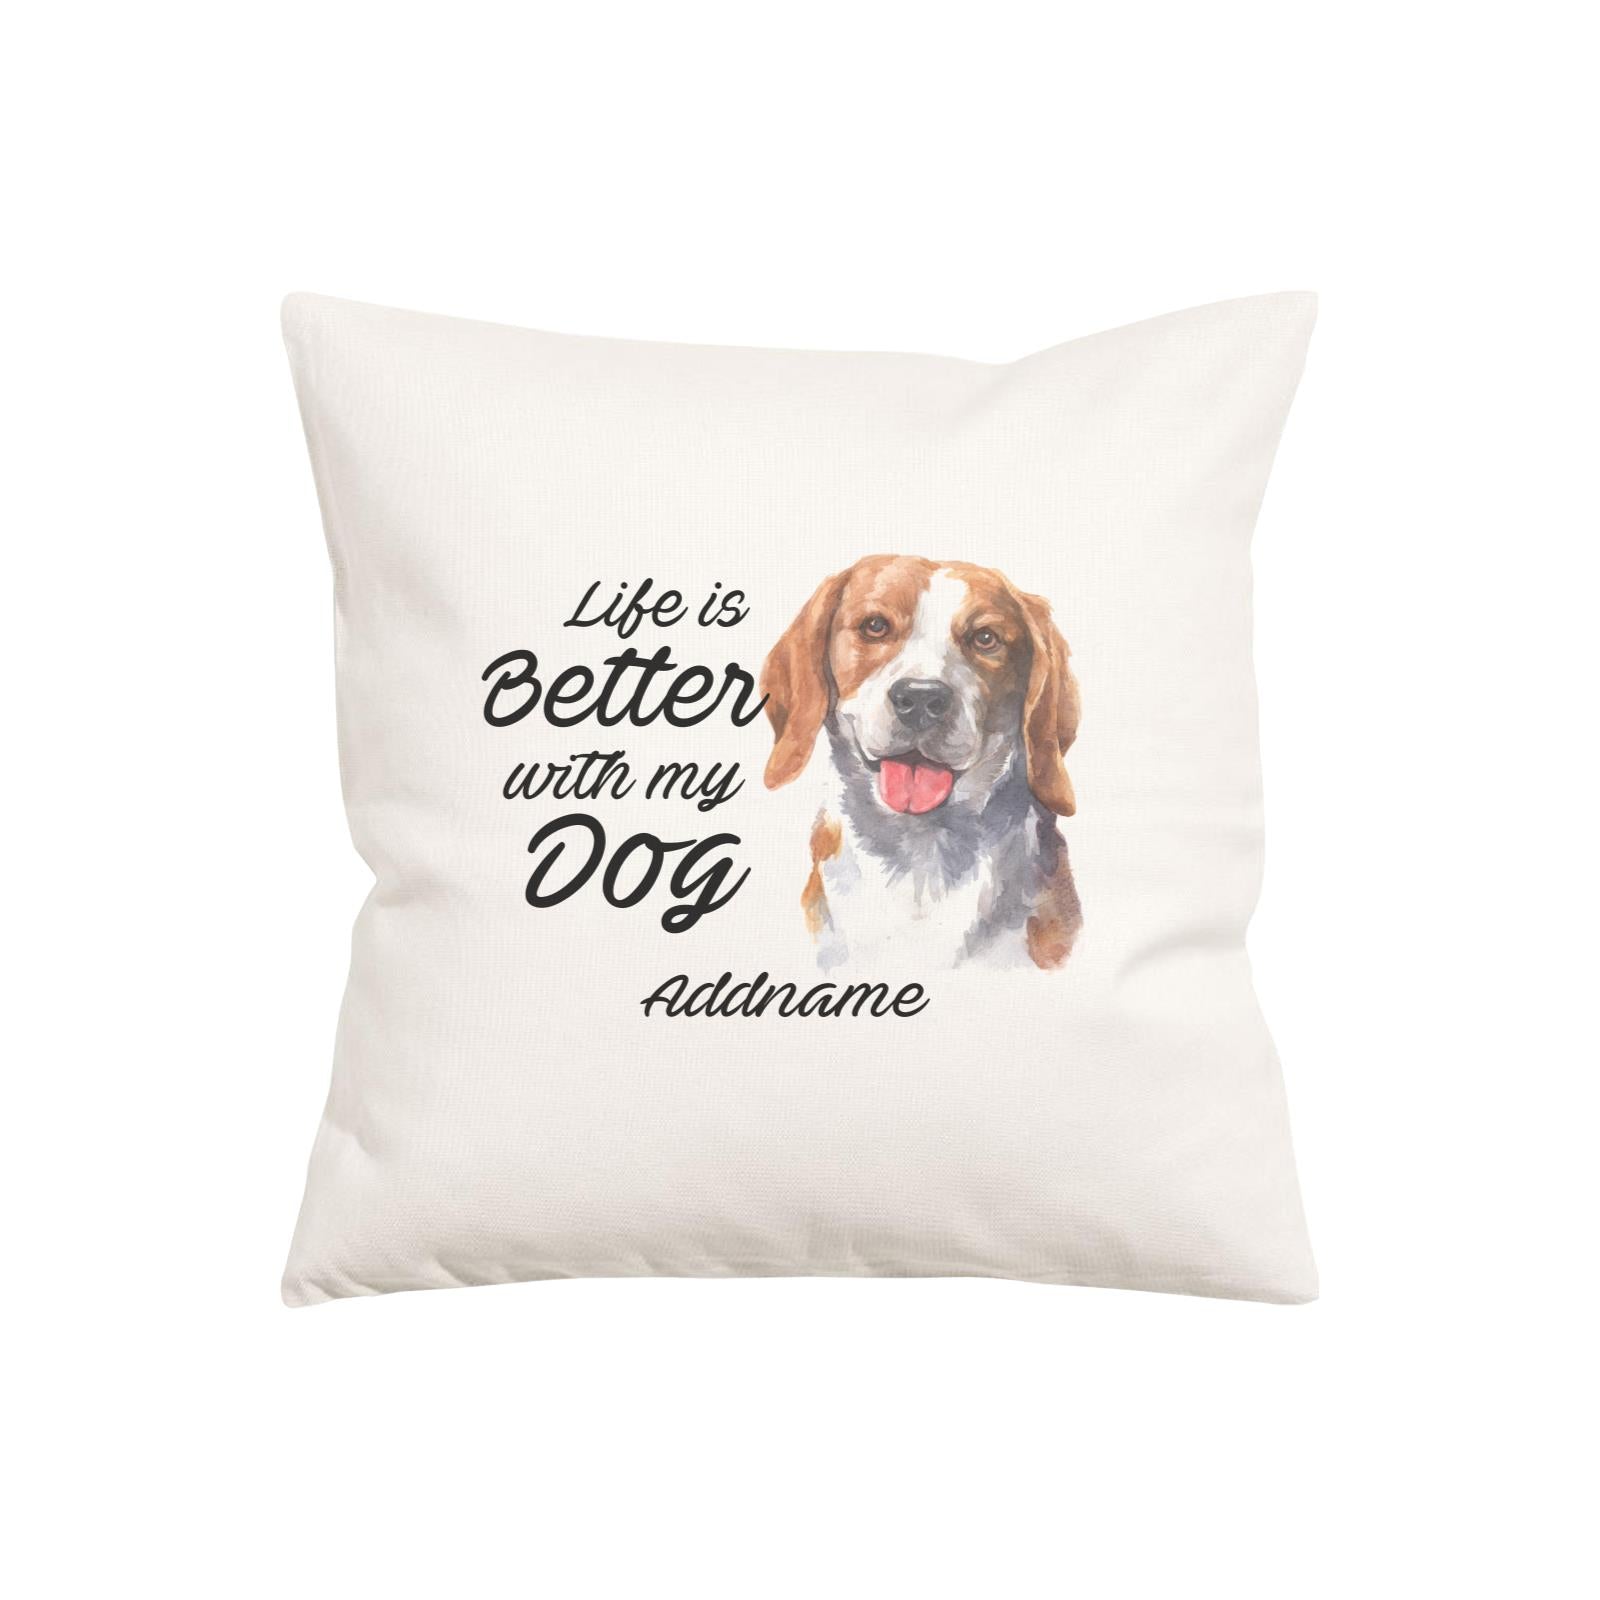 Watercolor Life is Better With My Dog Beagle Smile Addname Pillow Cushion